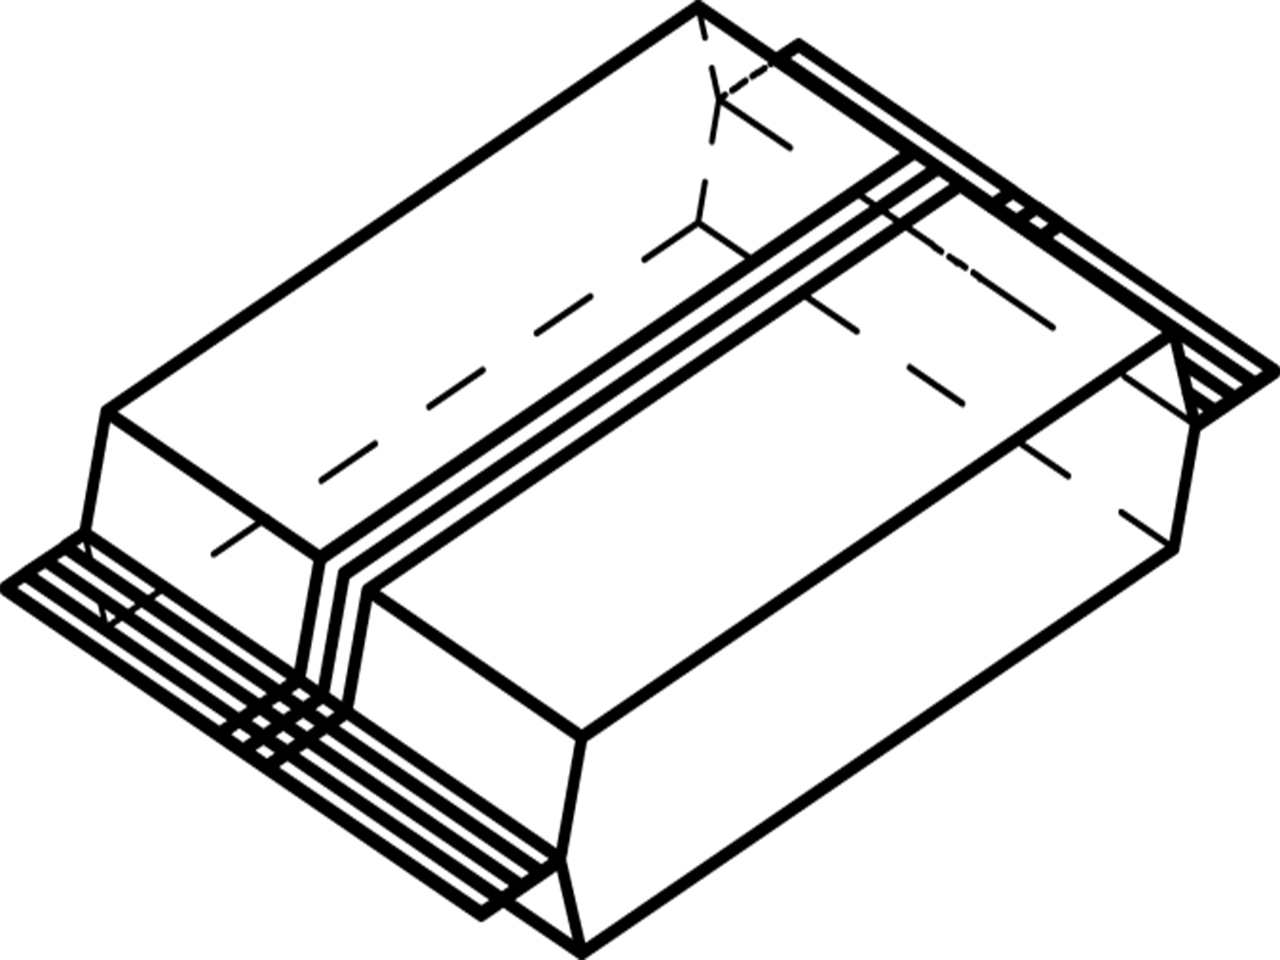 Illustration of the packaging type "Flowpack with longitudinal seam above/below"